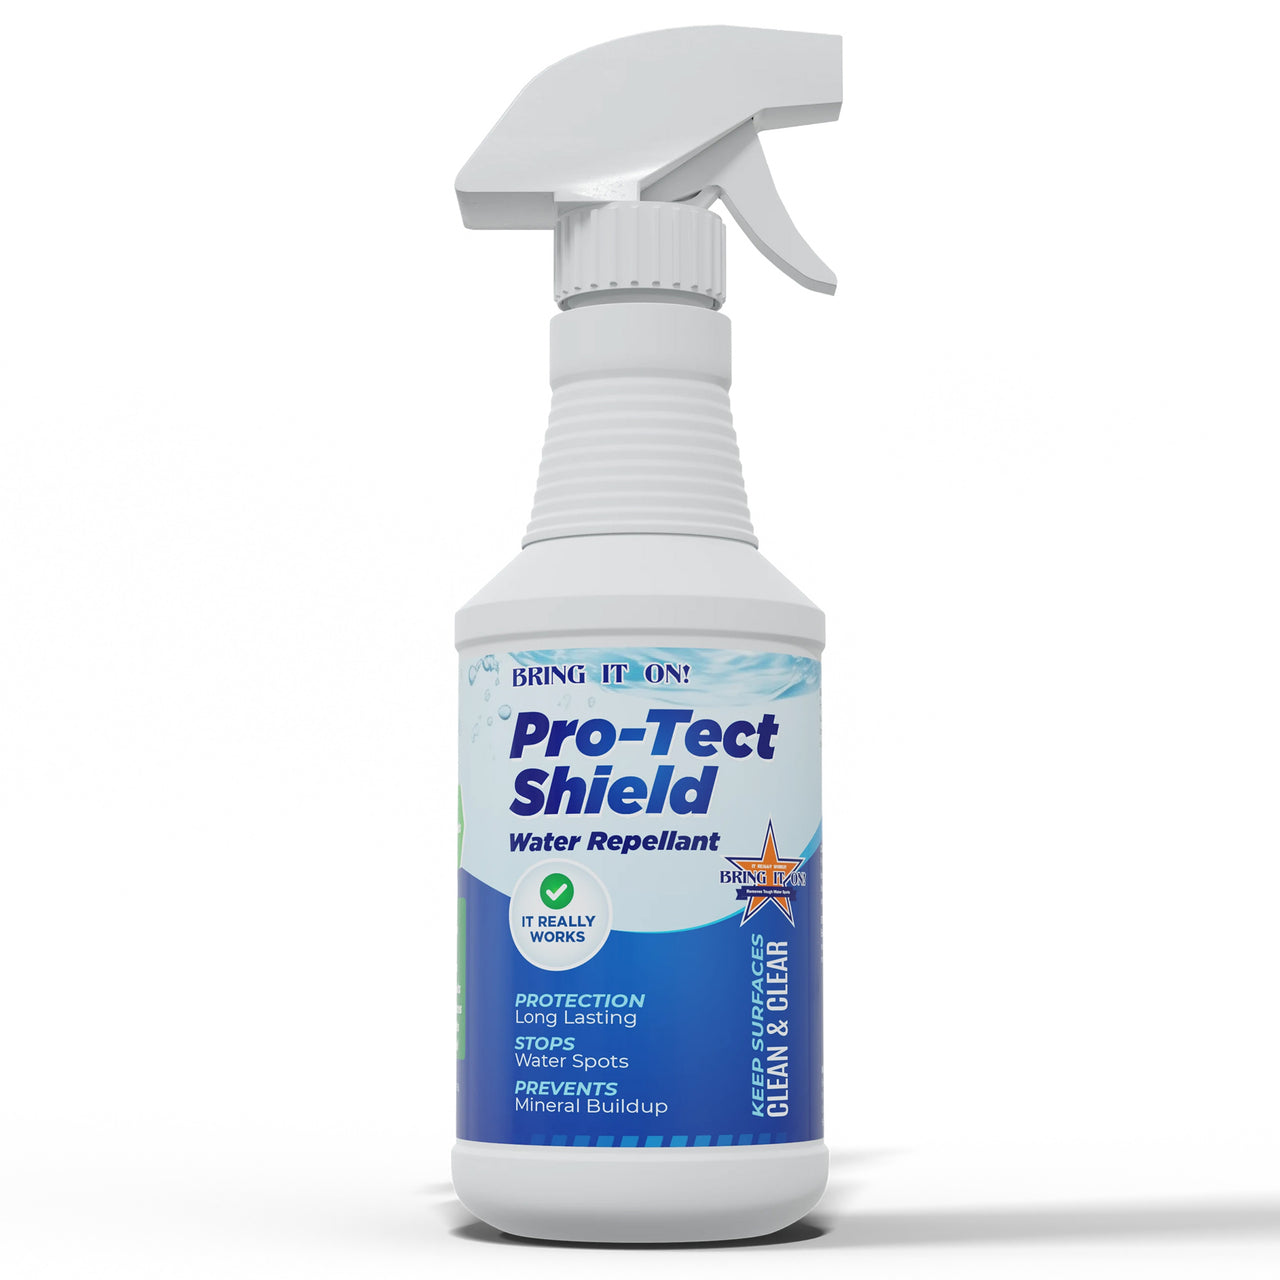 Pro-Tect Shield Water Repellant 16 oz. – Bring It On Cleaner